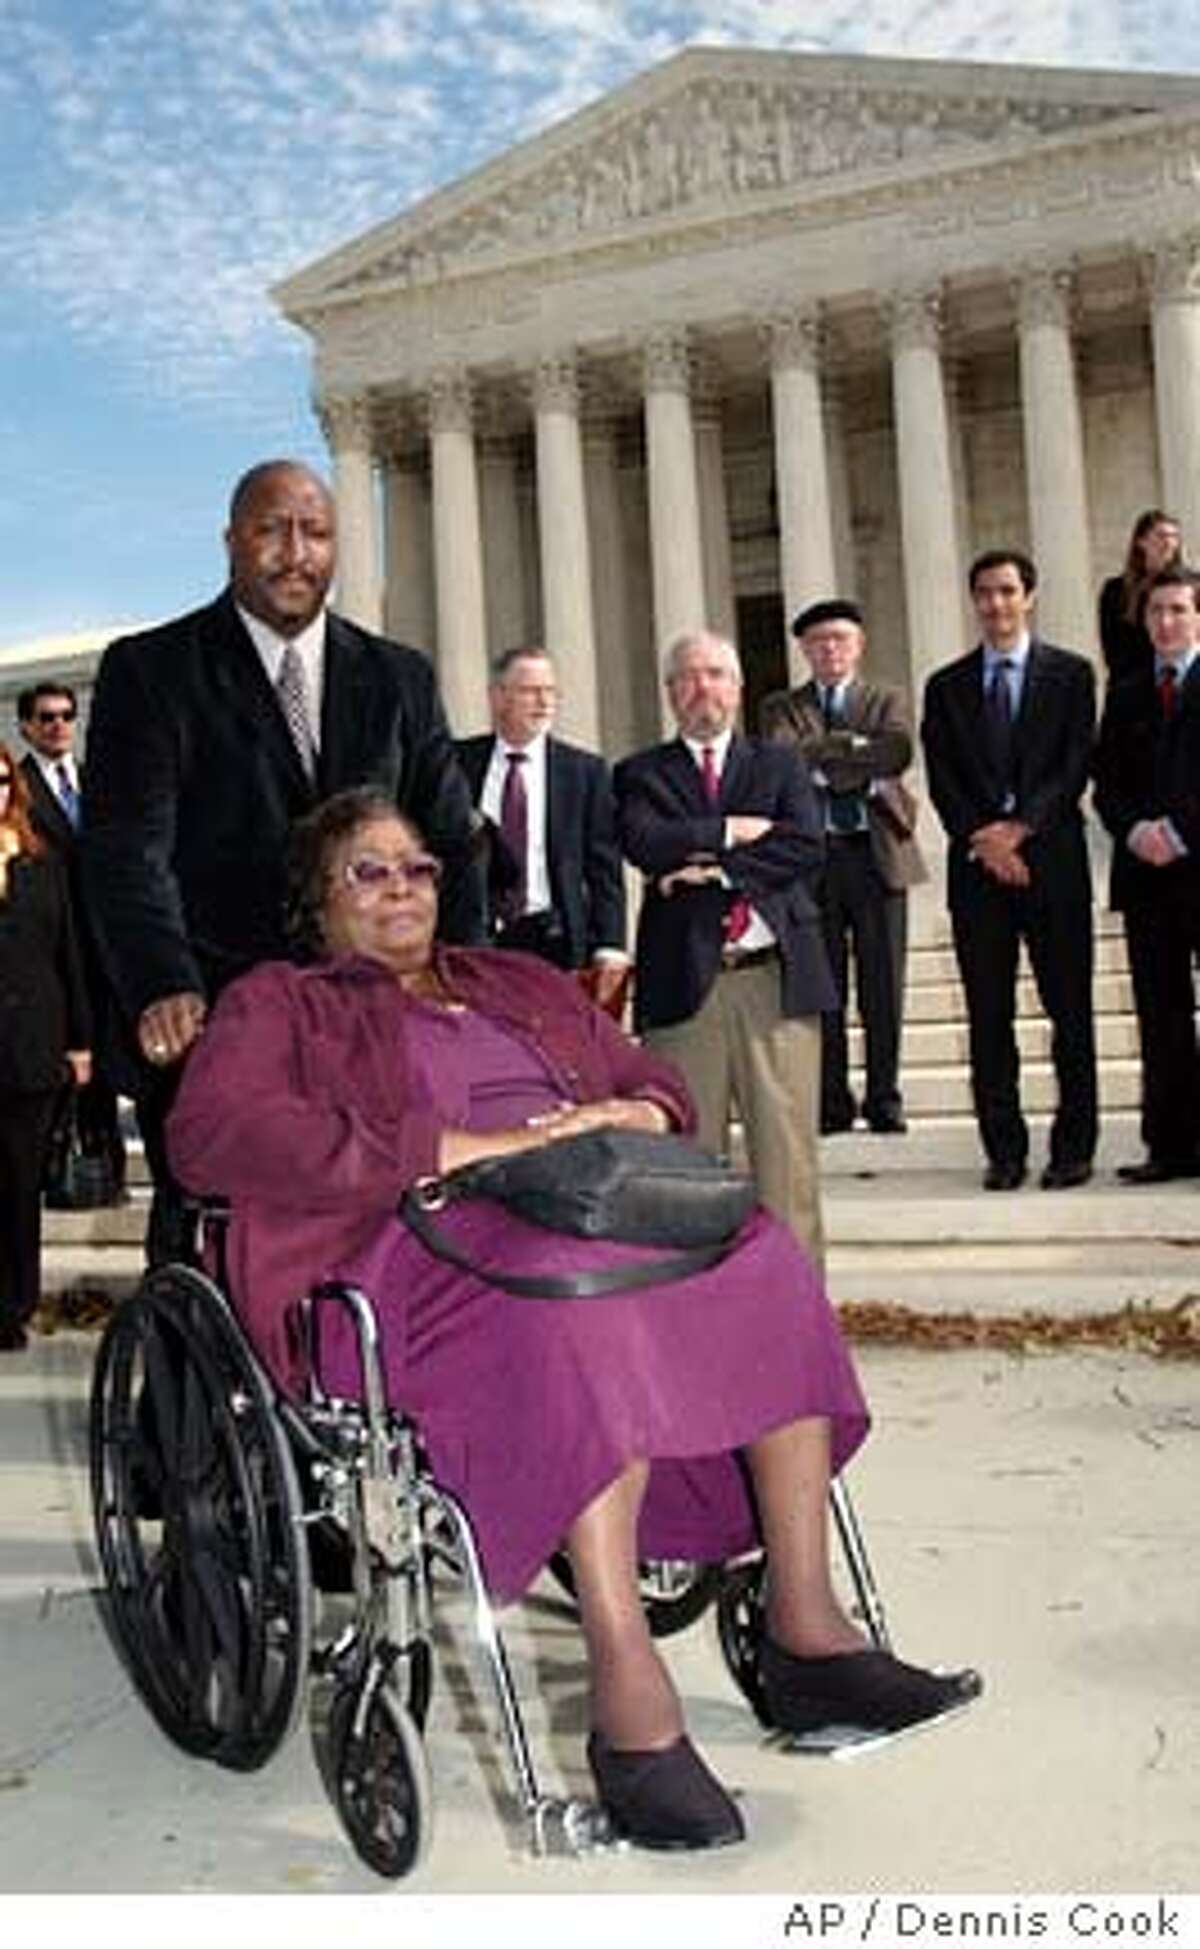 **FILE** Mayola Williams, in wheelchair, widow of Jesse Williams, who died of lung cancer, leaves the Supreme Court in Washington in this Oct. 31, 2006 file photo, following oral arguments in her lawsuit against Philip Morris. The Supreme Court threw out a $79.5 million punitive damages award to Williams, Tuesday, Feb. 20, 2007, a boon to businesses seeking stricter limits on big-dollar jury verdicts. (AP Photo/Dennis Cook, file)